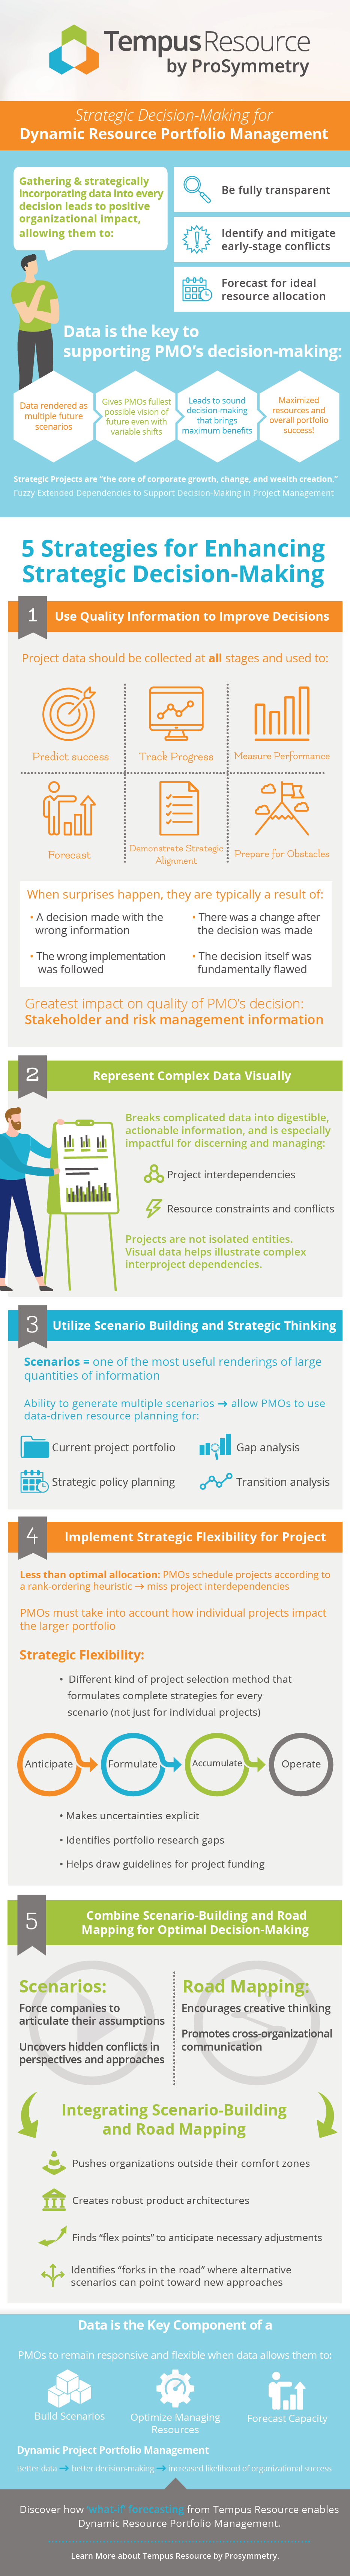 5 strategies for enhancing strategic decision-making infographic